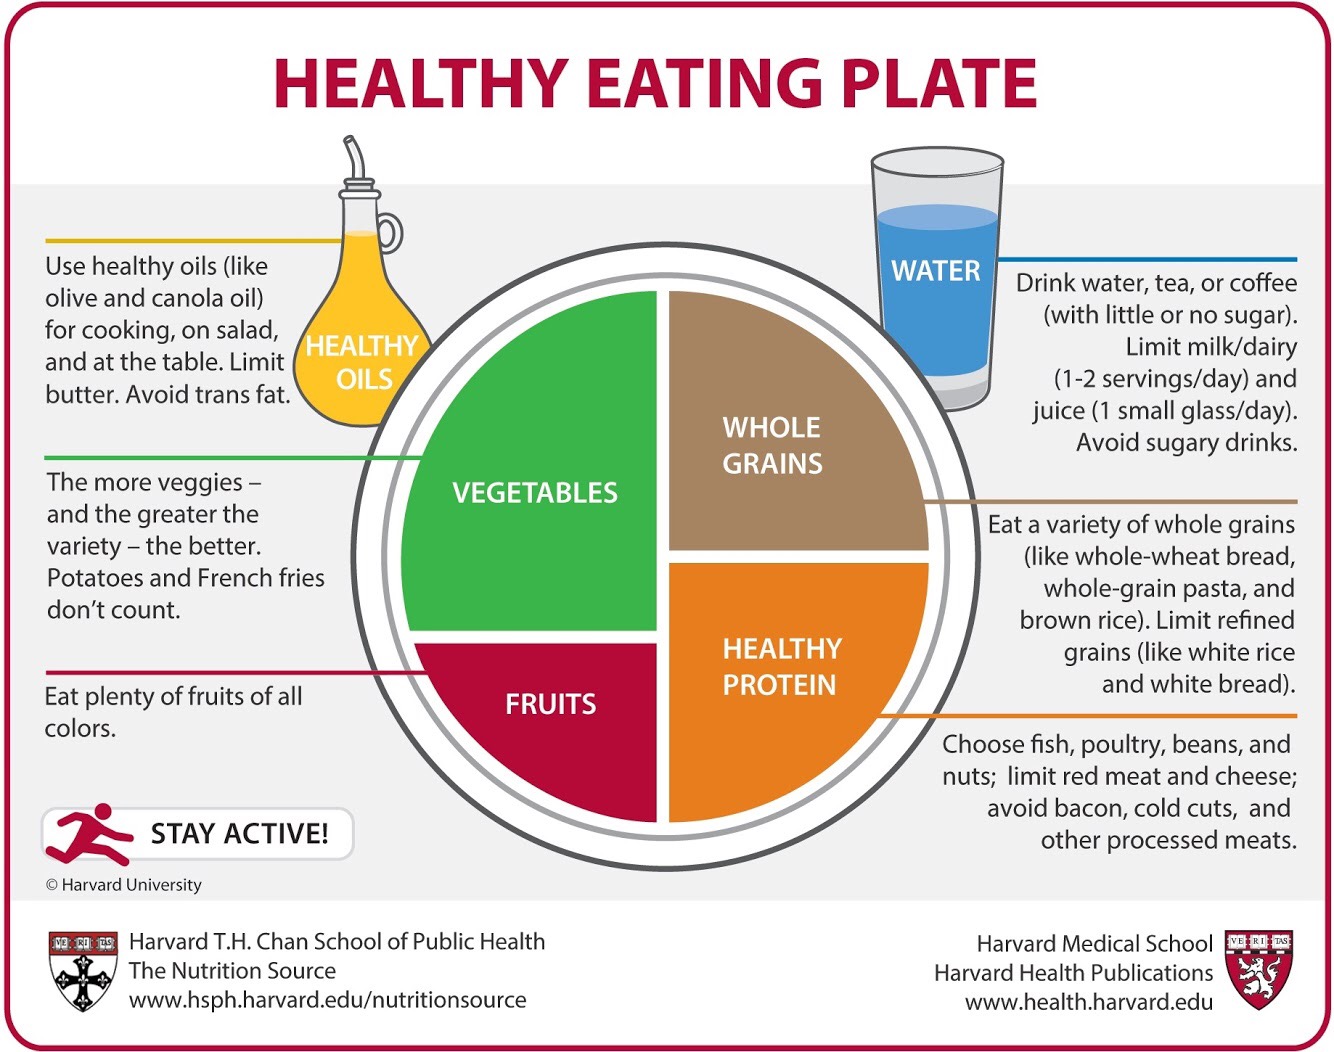 Healthy plate with legumes